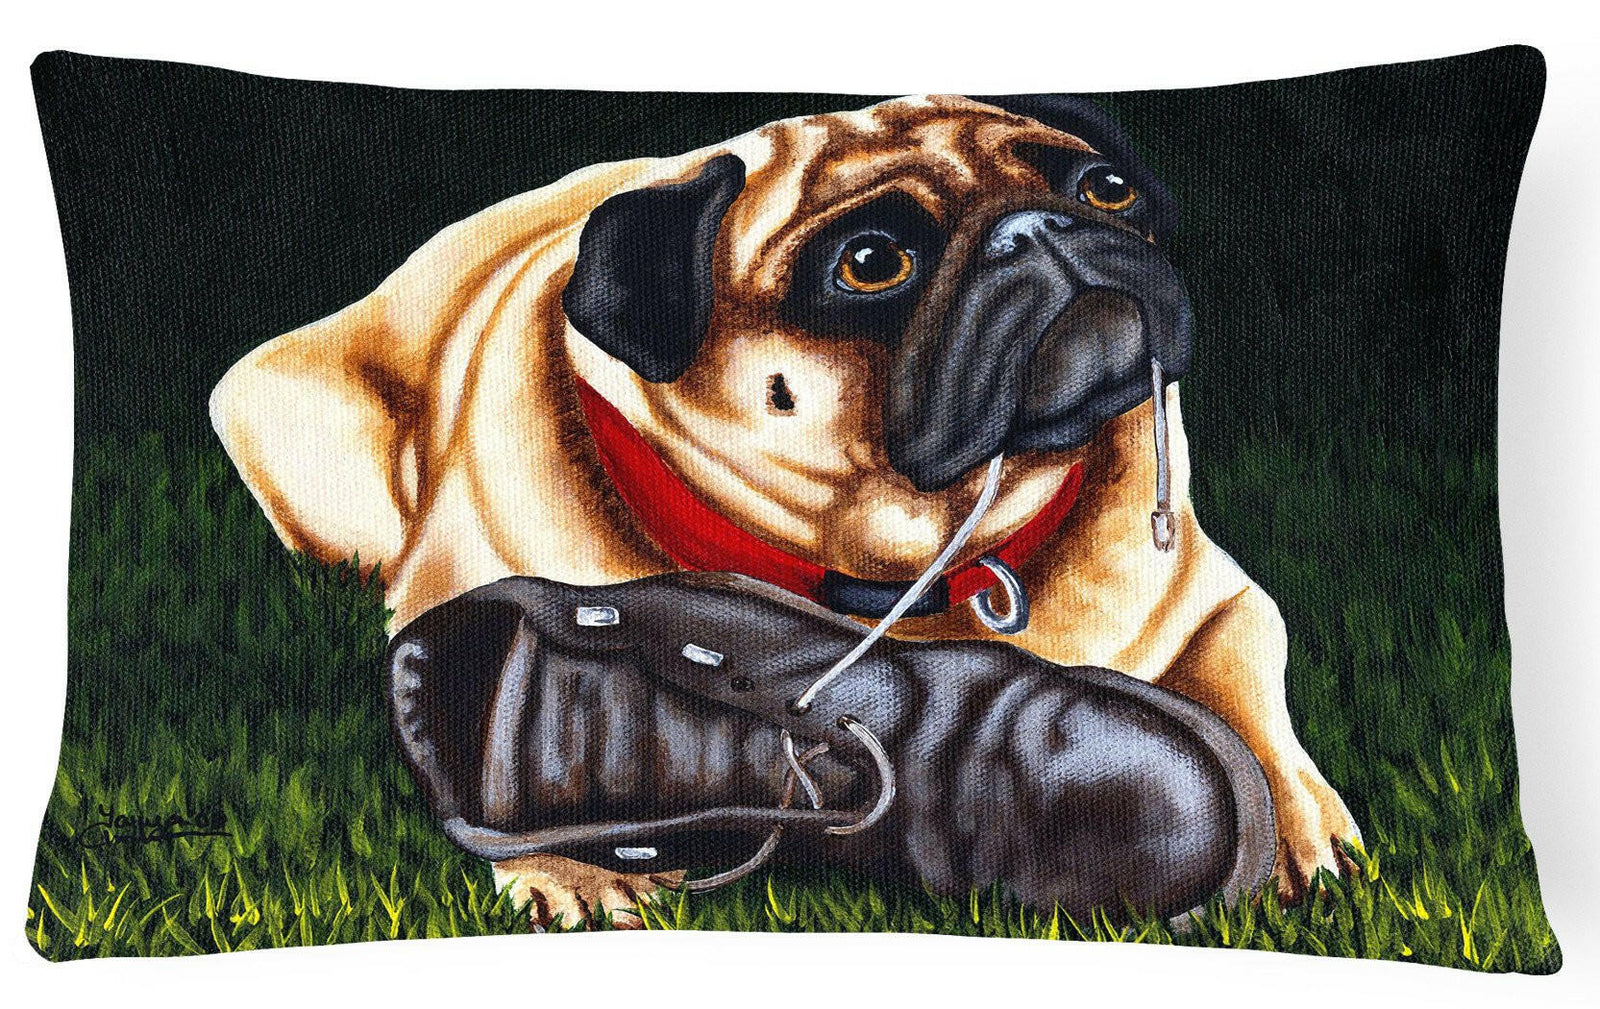 Cluster Buster the Pug Fabric Decorative Pillow AMB1382PW1216 by Caroline's Treasures